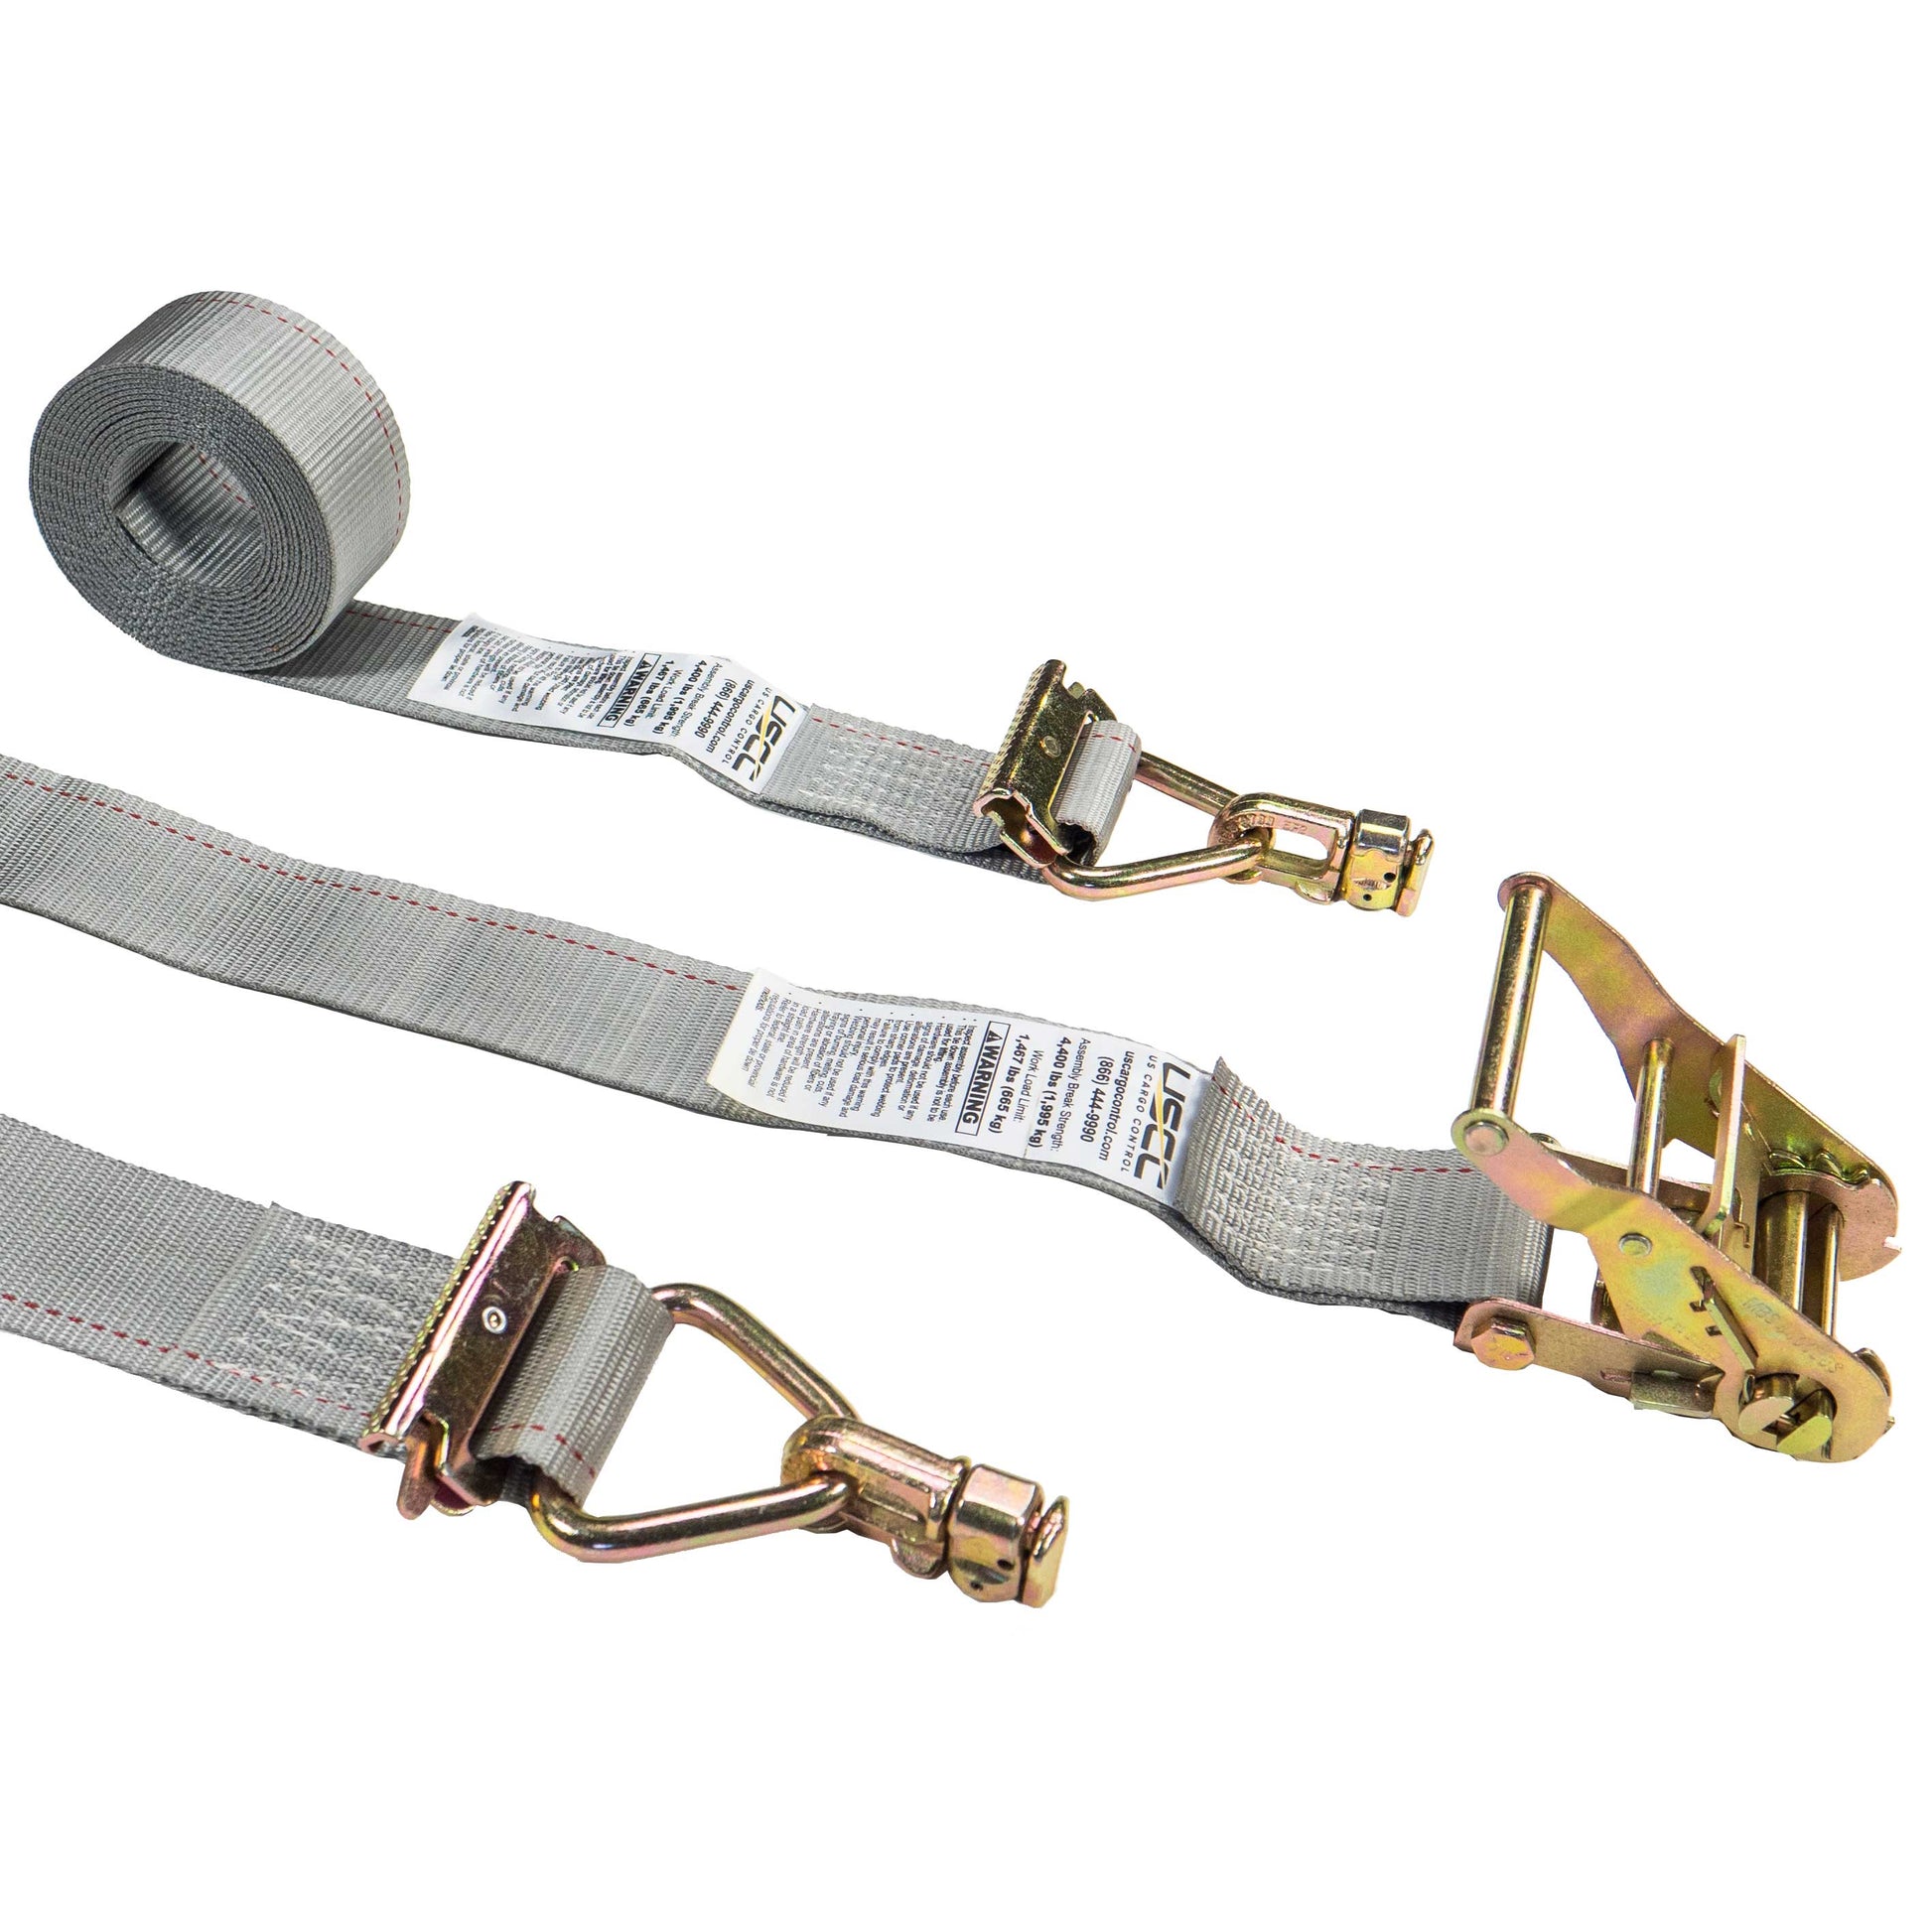 2 inch x 16 foot Gray E Track Ratchet Straps w Double Stud Fittings image 1 of 9